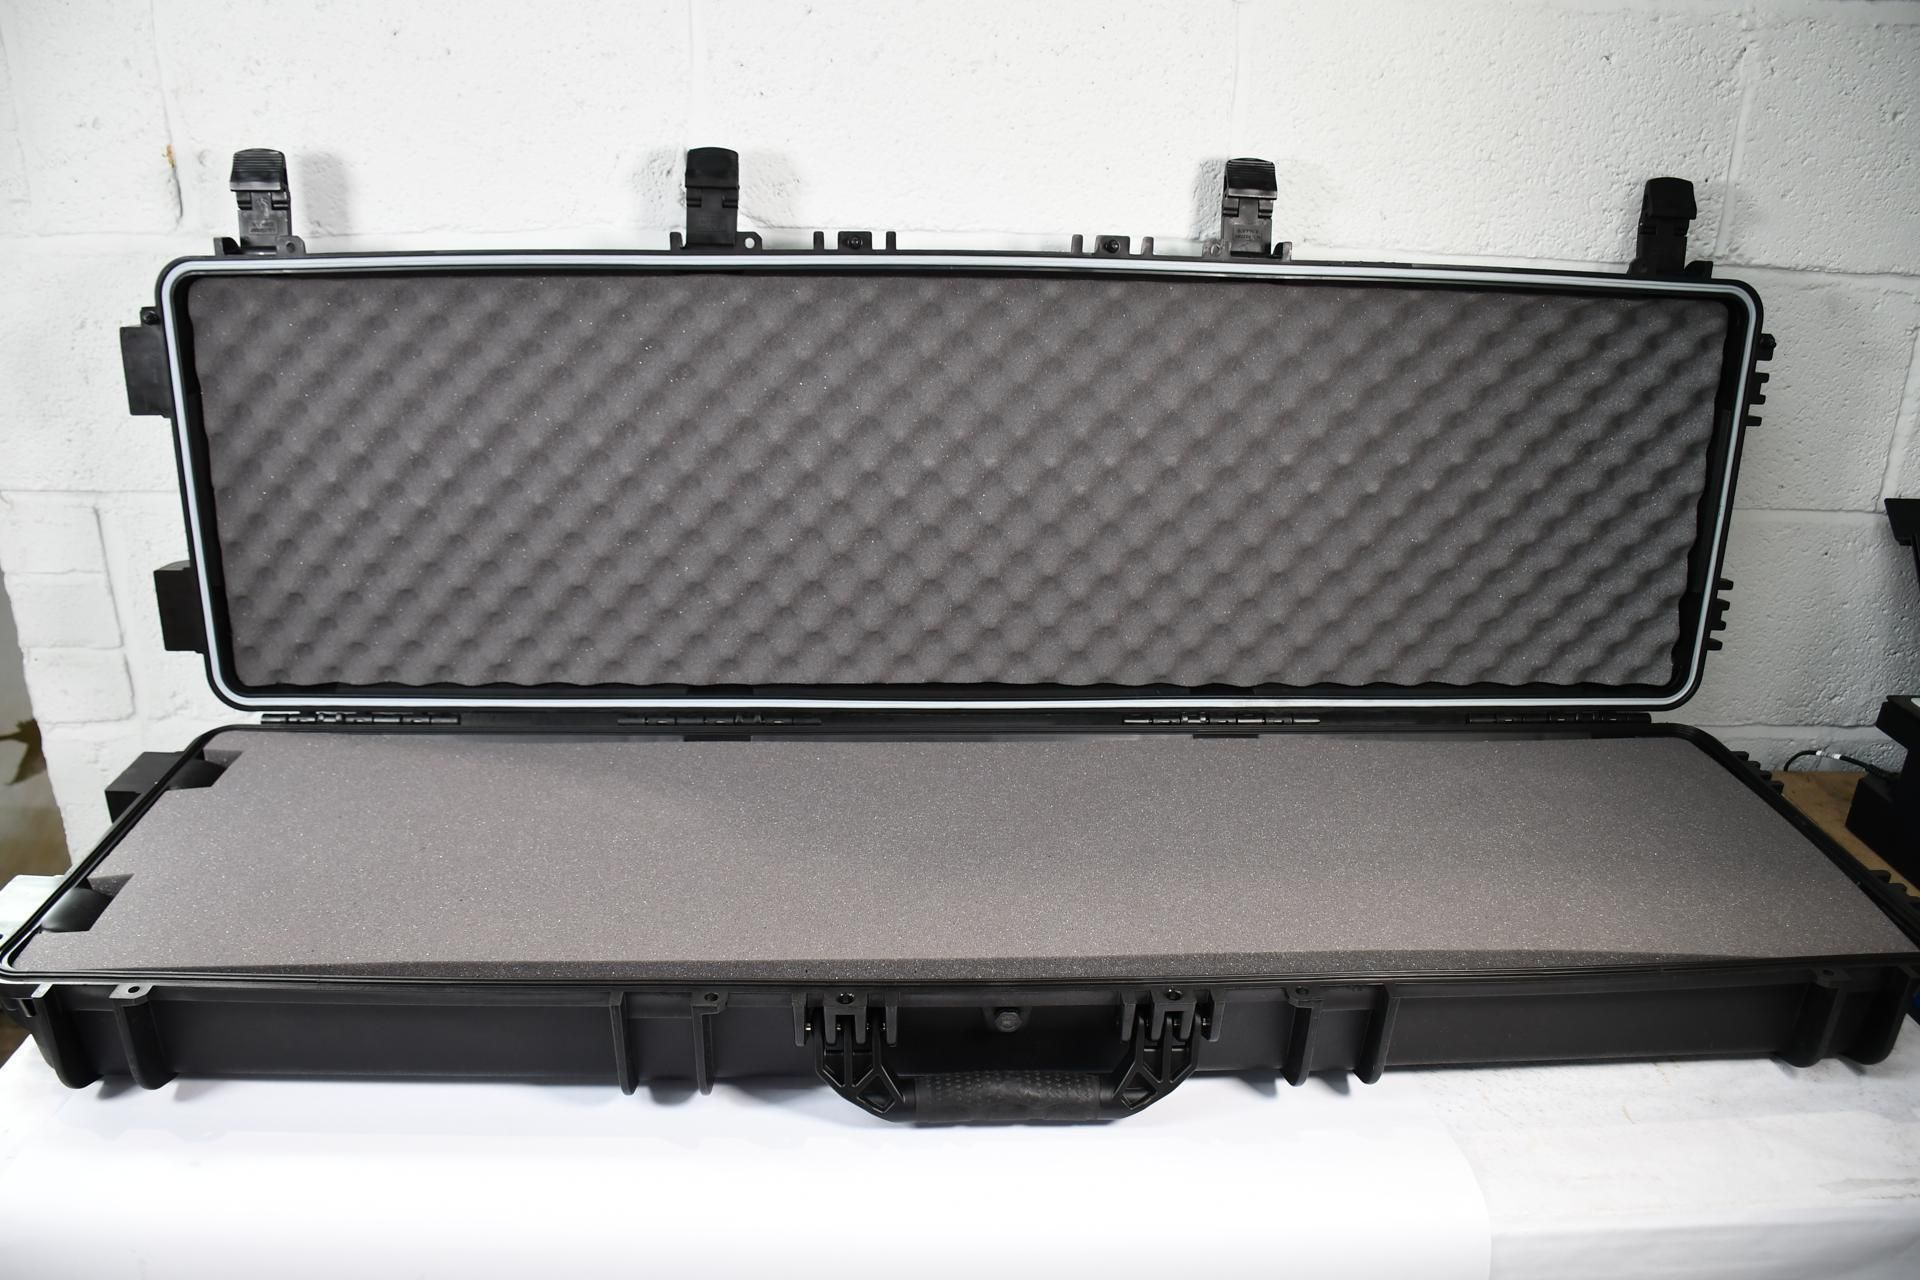 Three Condition 1 Rifle Gun Cases in Black (Over 18s only).